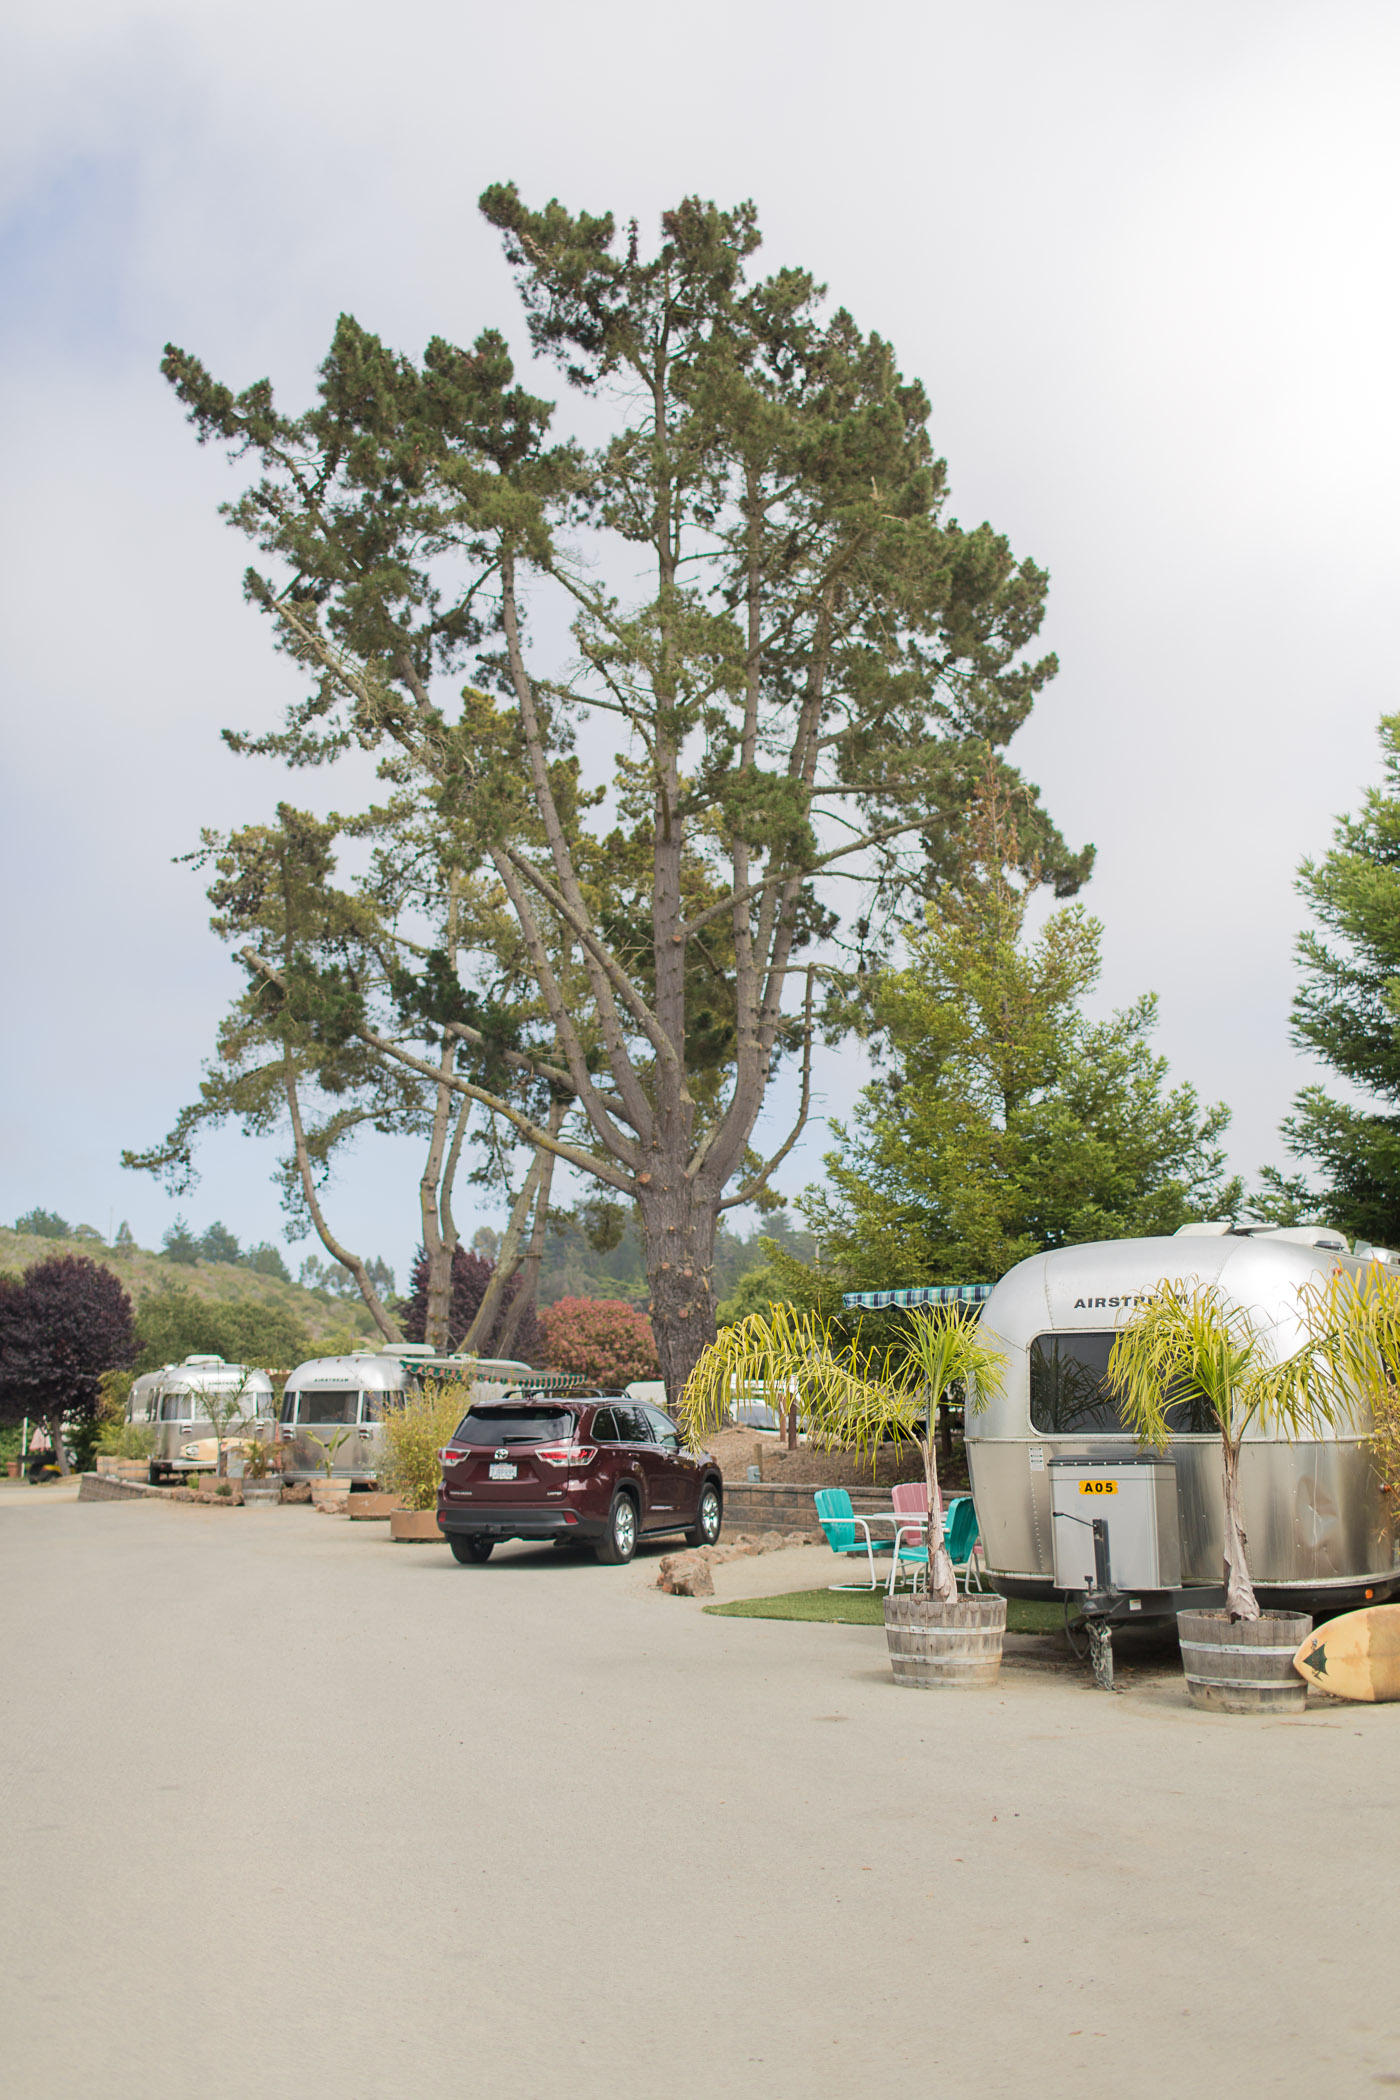 Glamping in an Airstream